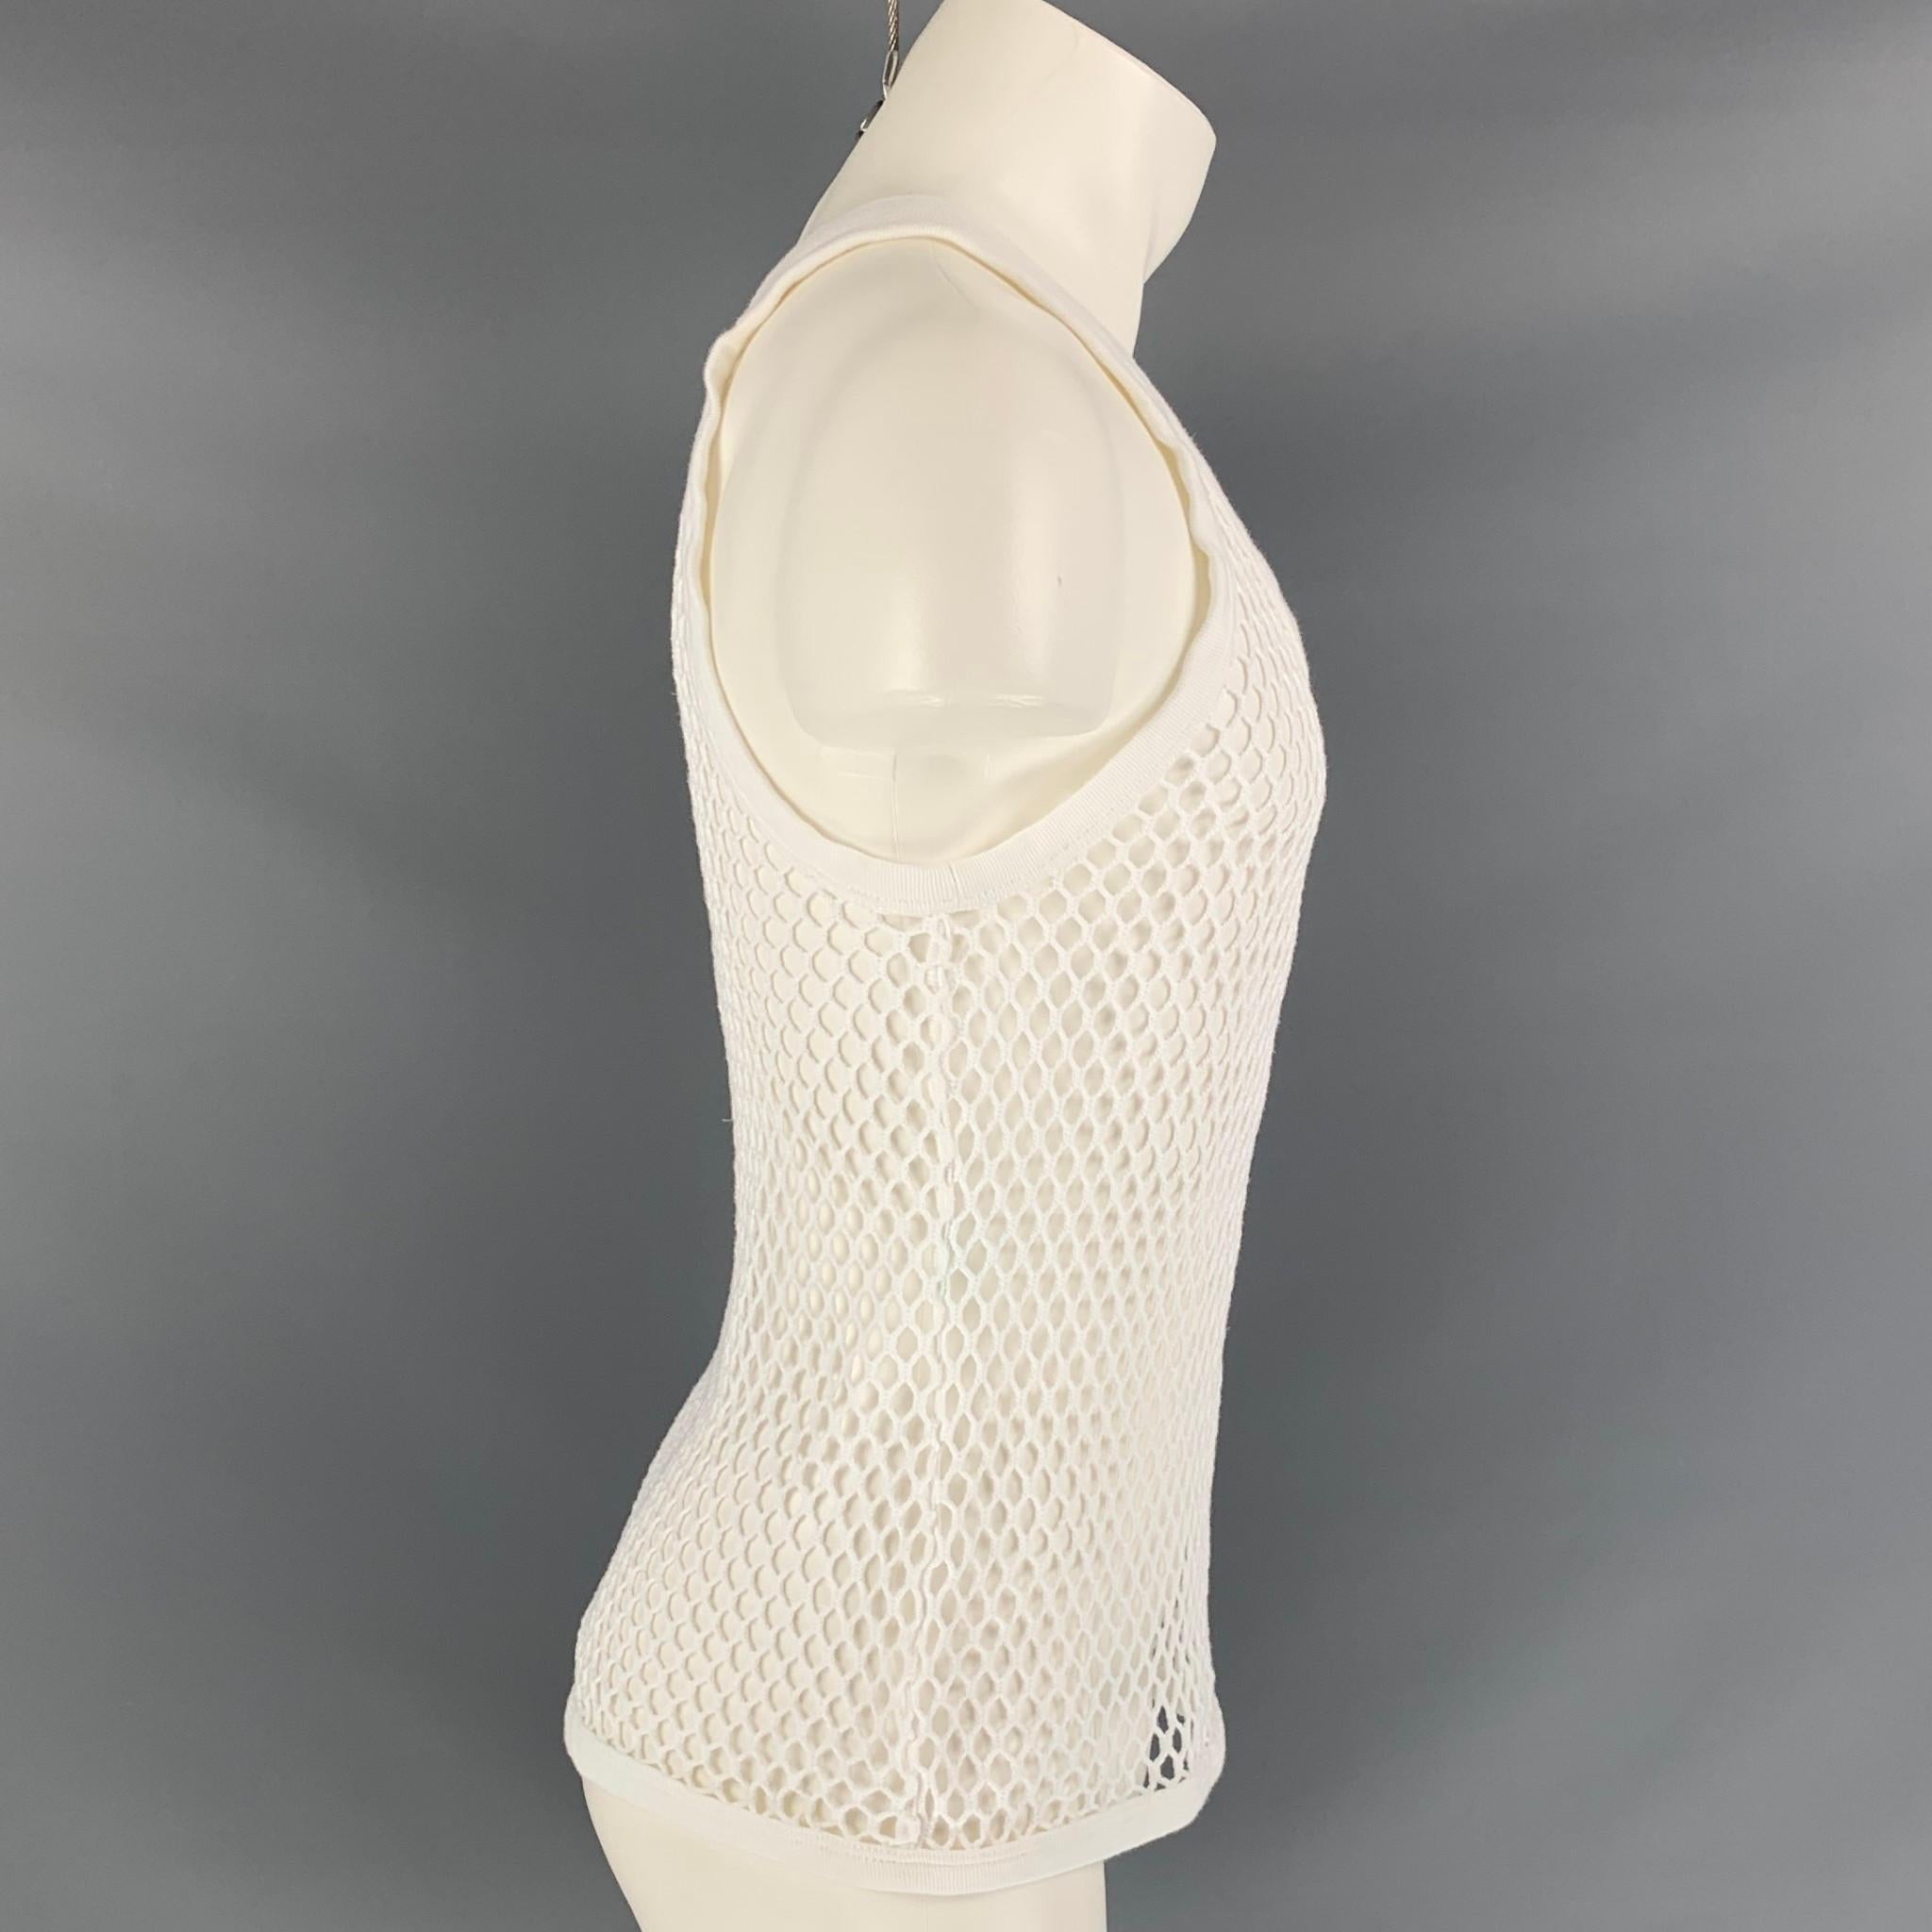 BURBERRY tank top comes in a white mesh cotton. Made in Italy. 

Good Pre-Owned Condition. Minor discoloration at lower front.
Marked: M

Measurements:

Chest: 34 in.
Length: 23 in. 